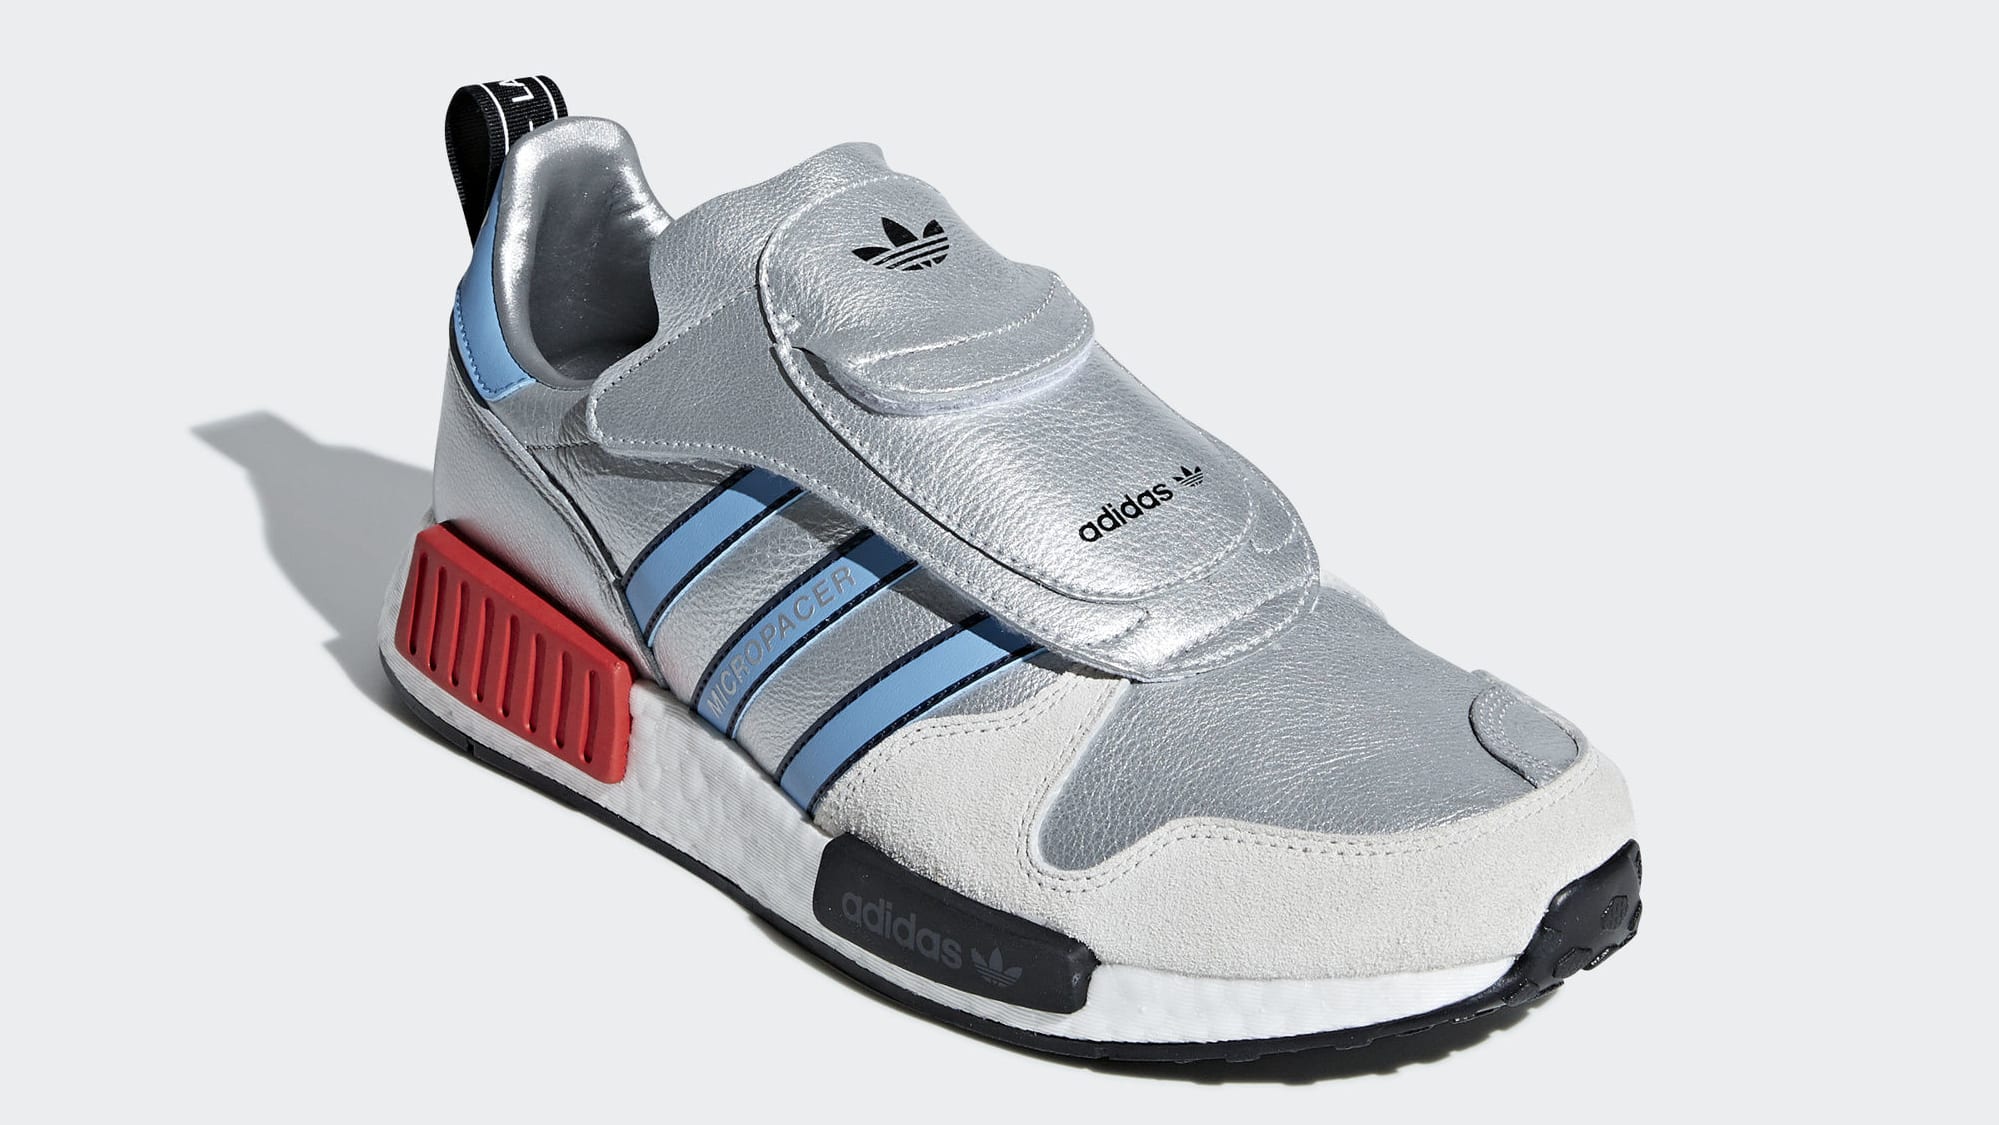 Adidas Micropacer NMD R1 Silver Release Date G26778 Front